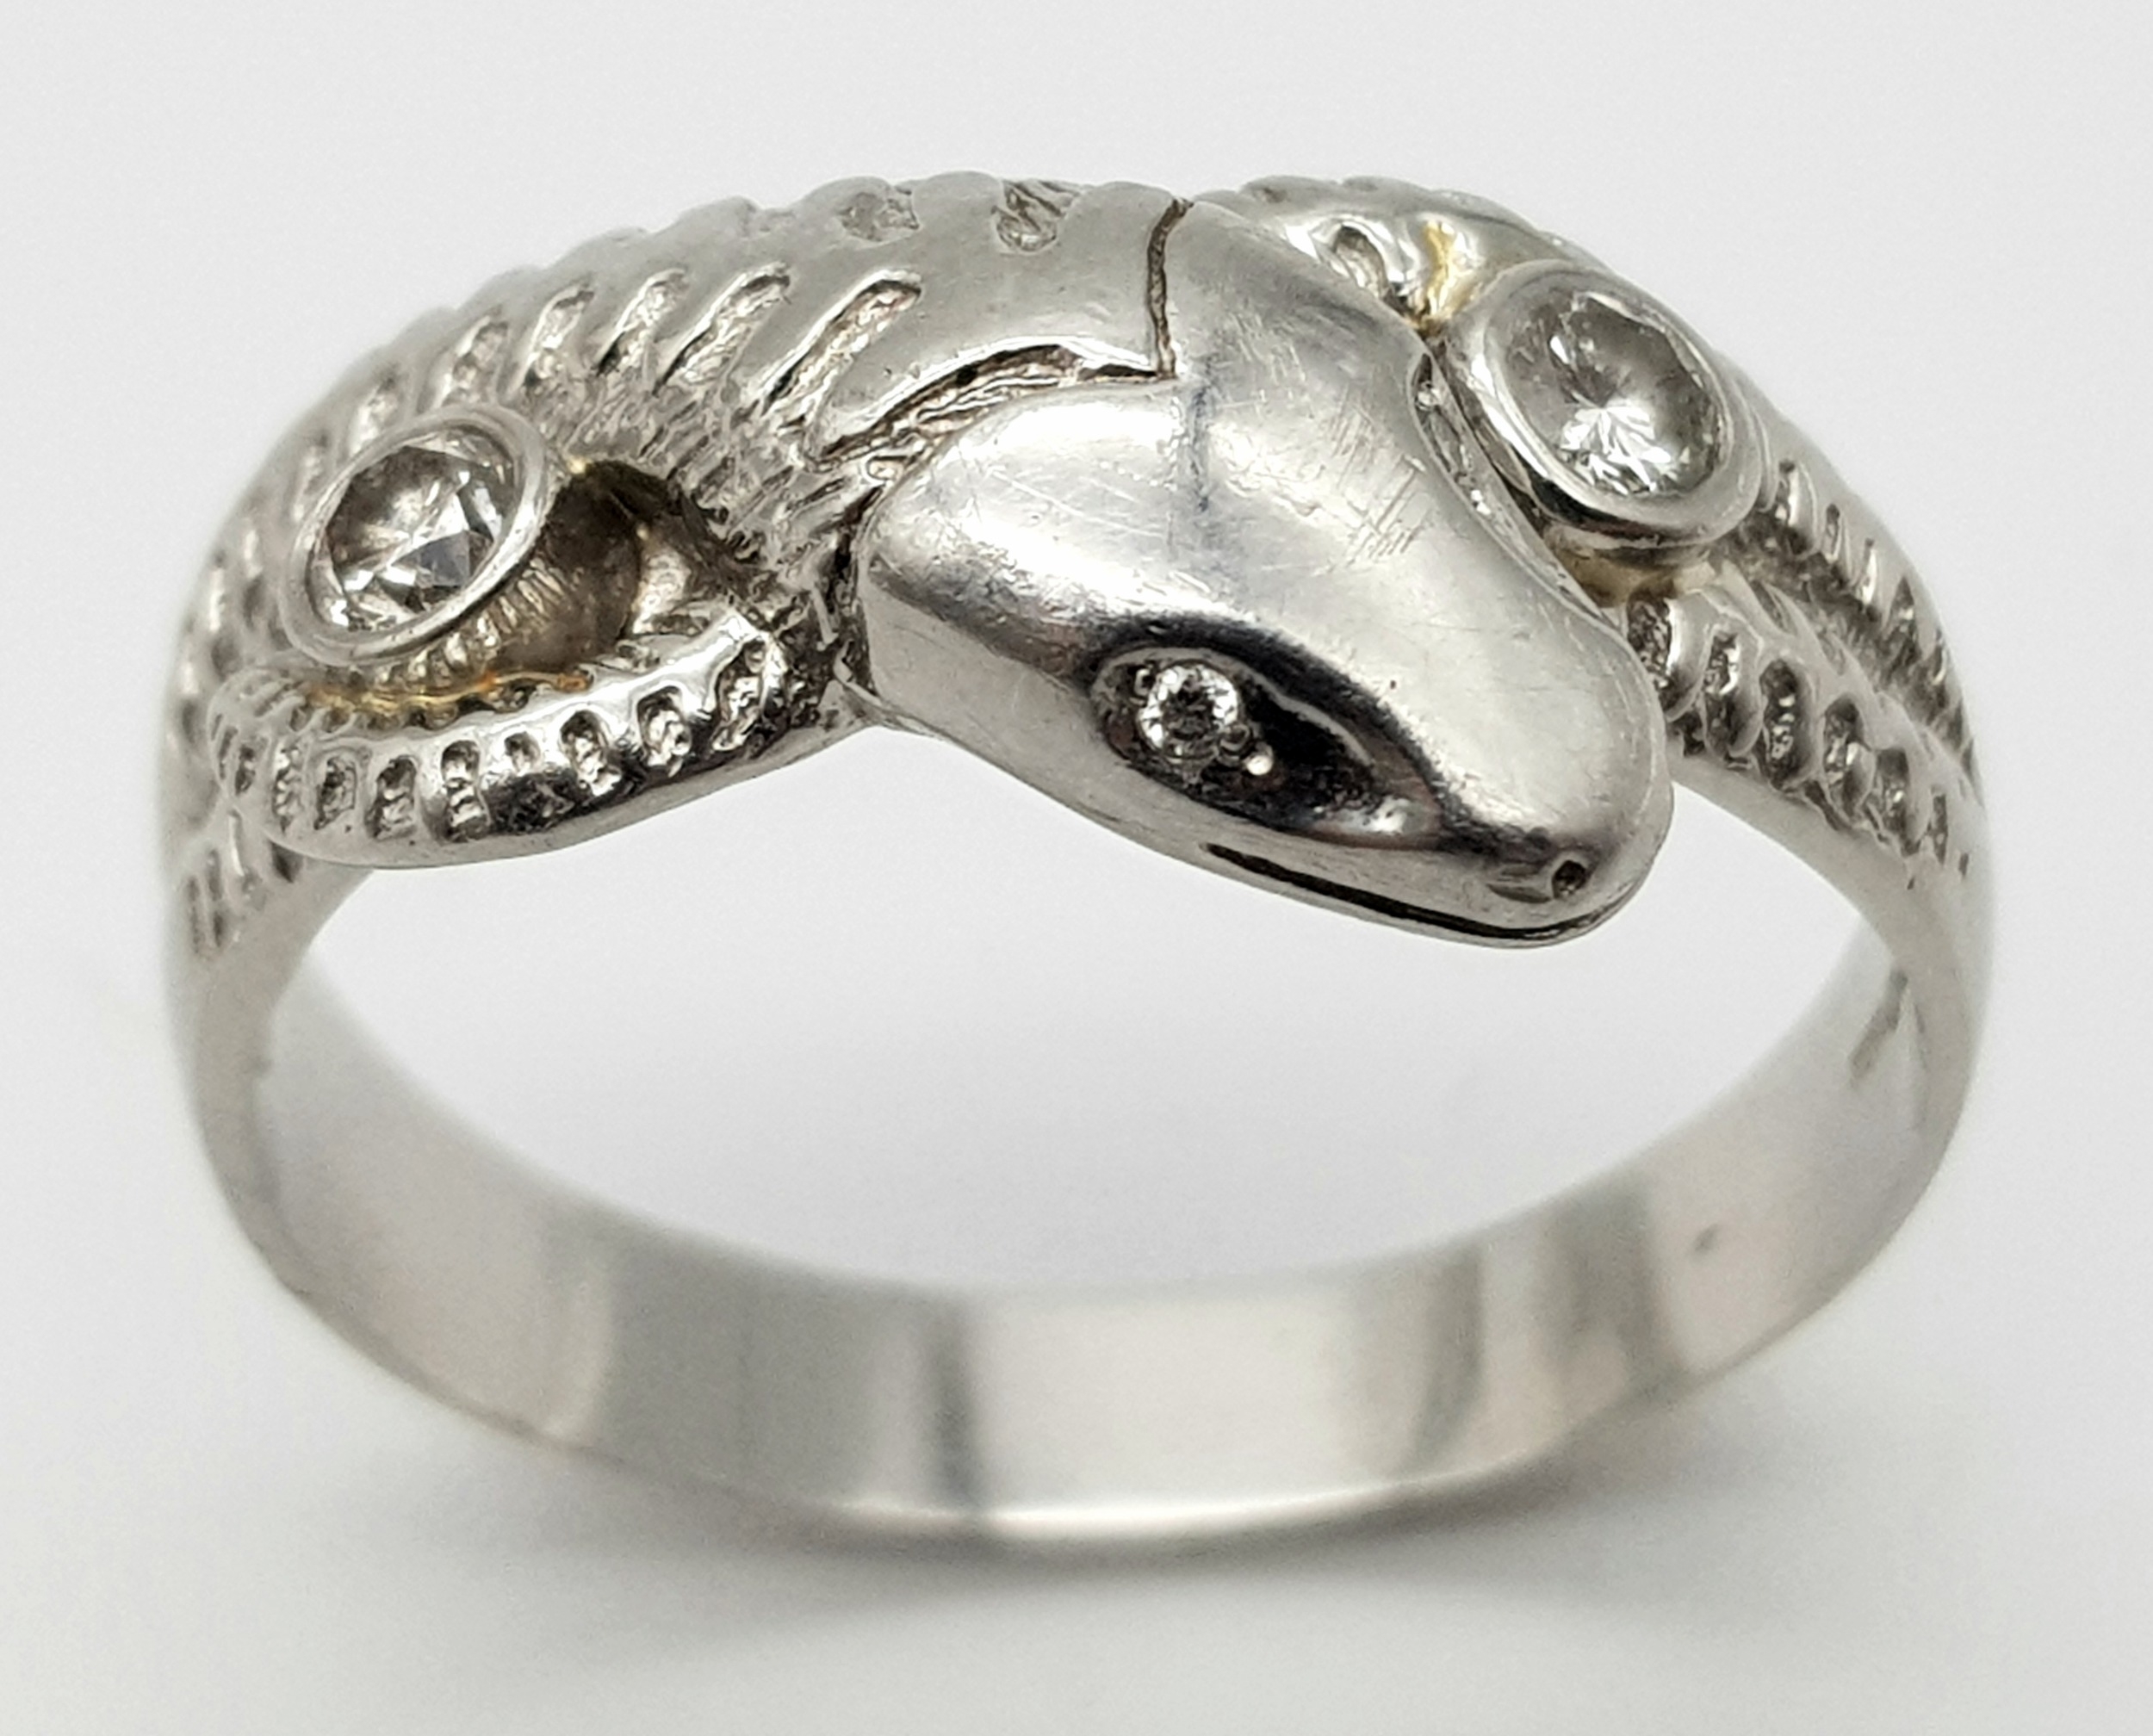 A Very Large 950 Platinum and Diamond Snake Ring. A coiling serpent with diamond eyes and body. Size - Image 2 of 5